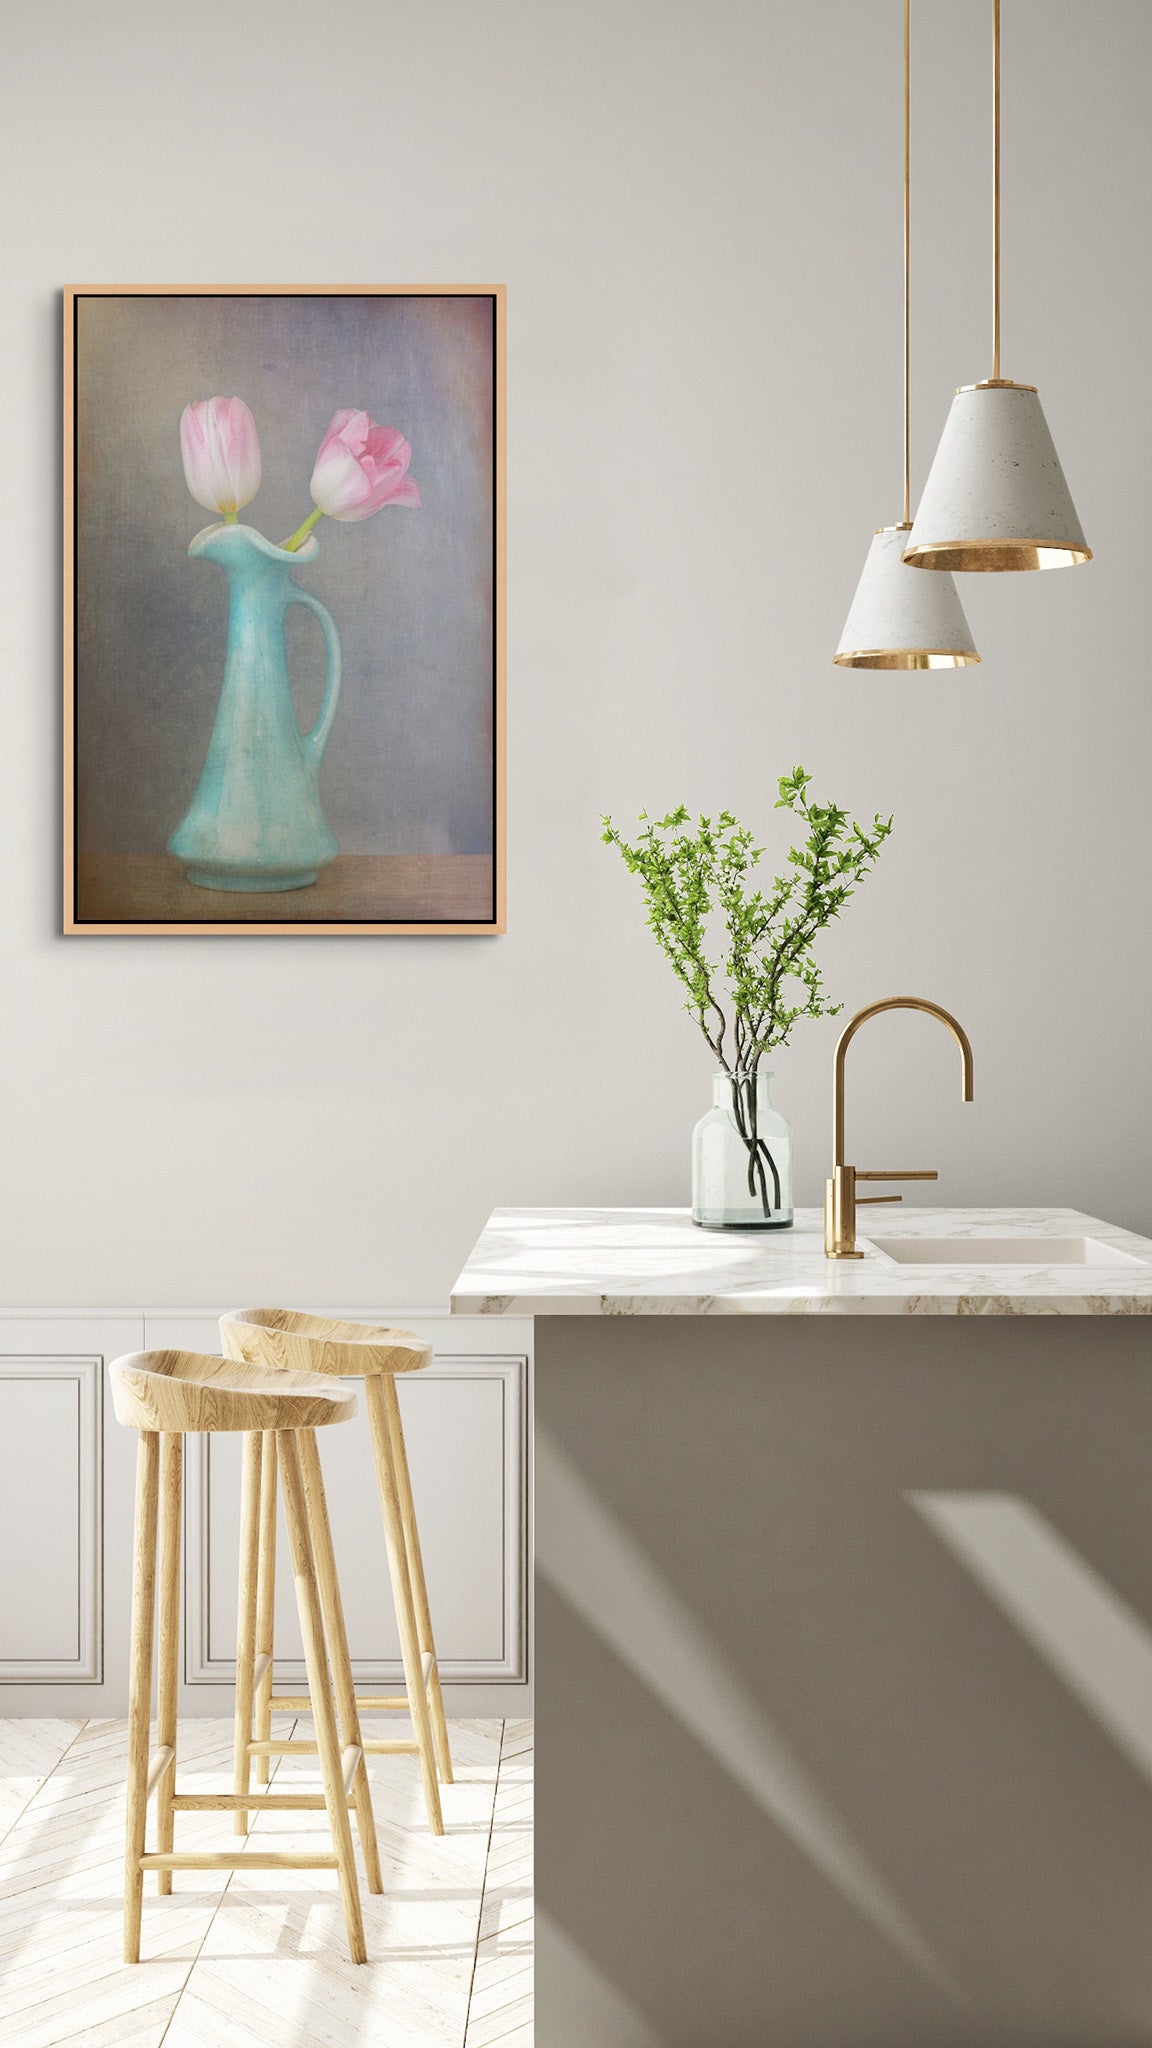 Picture hanging on the wall of a kitchen. The picture is a fine art flower photograph of two pink tulips in a vase titled "An Ambitious Pair" by Cameron Dreaux of Dreaux Fine Art.